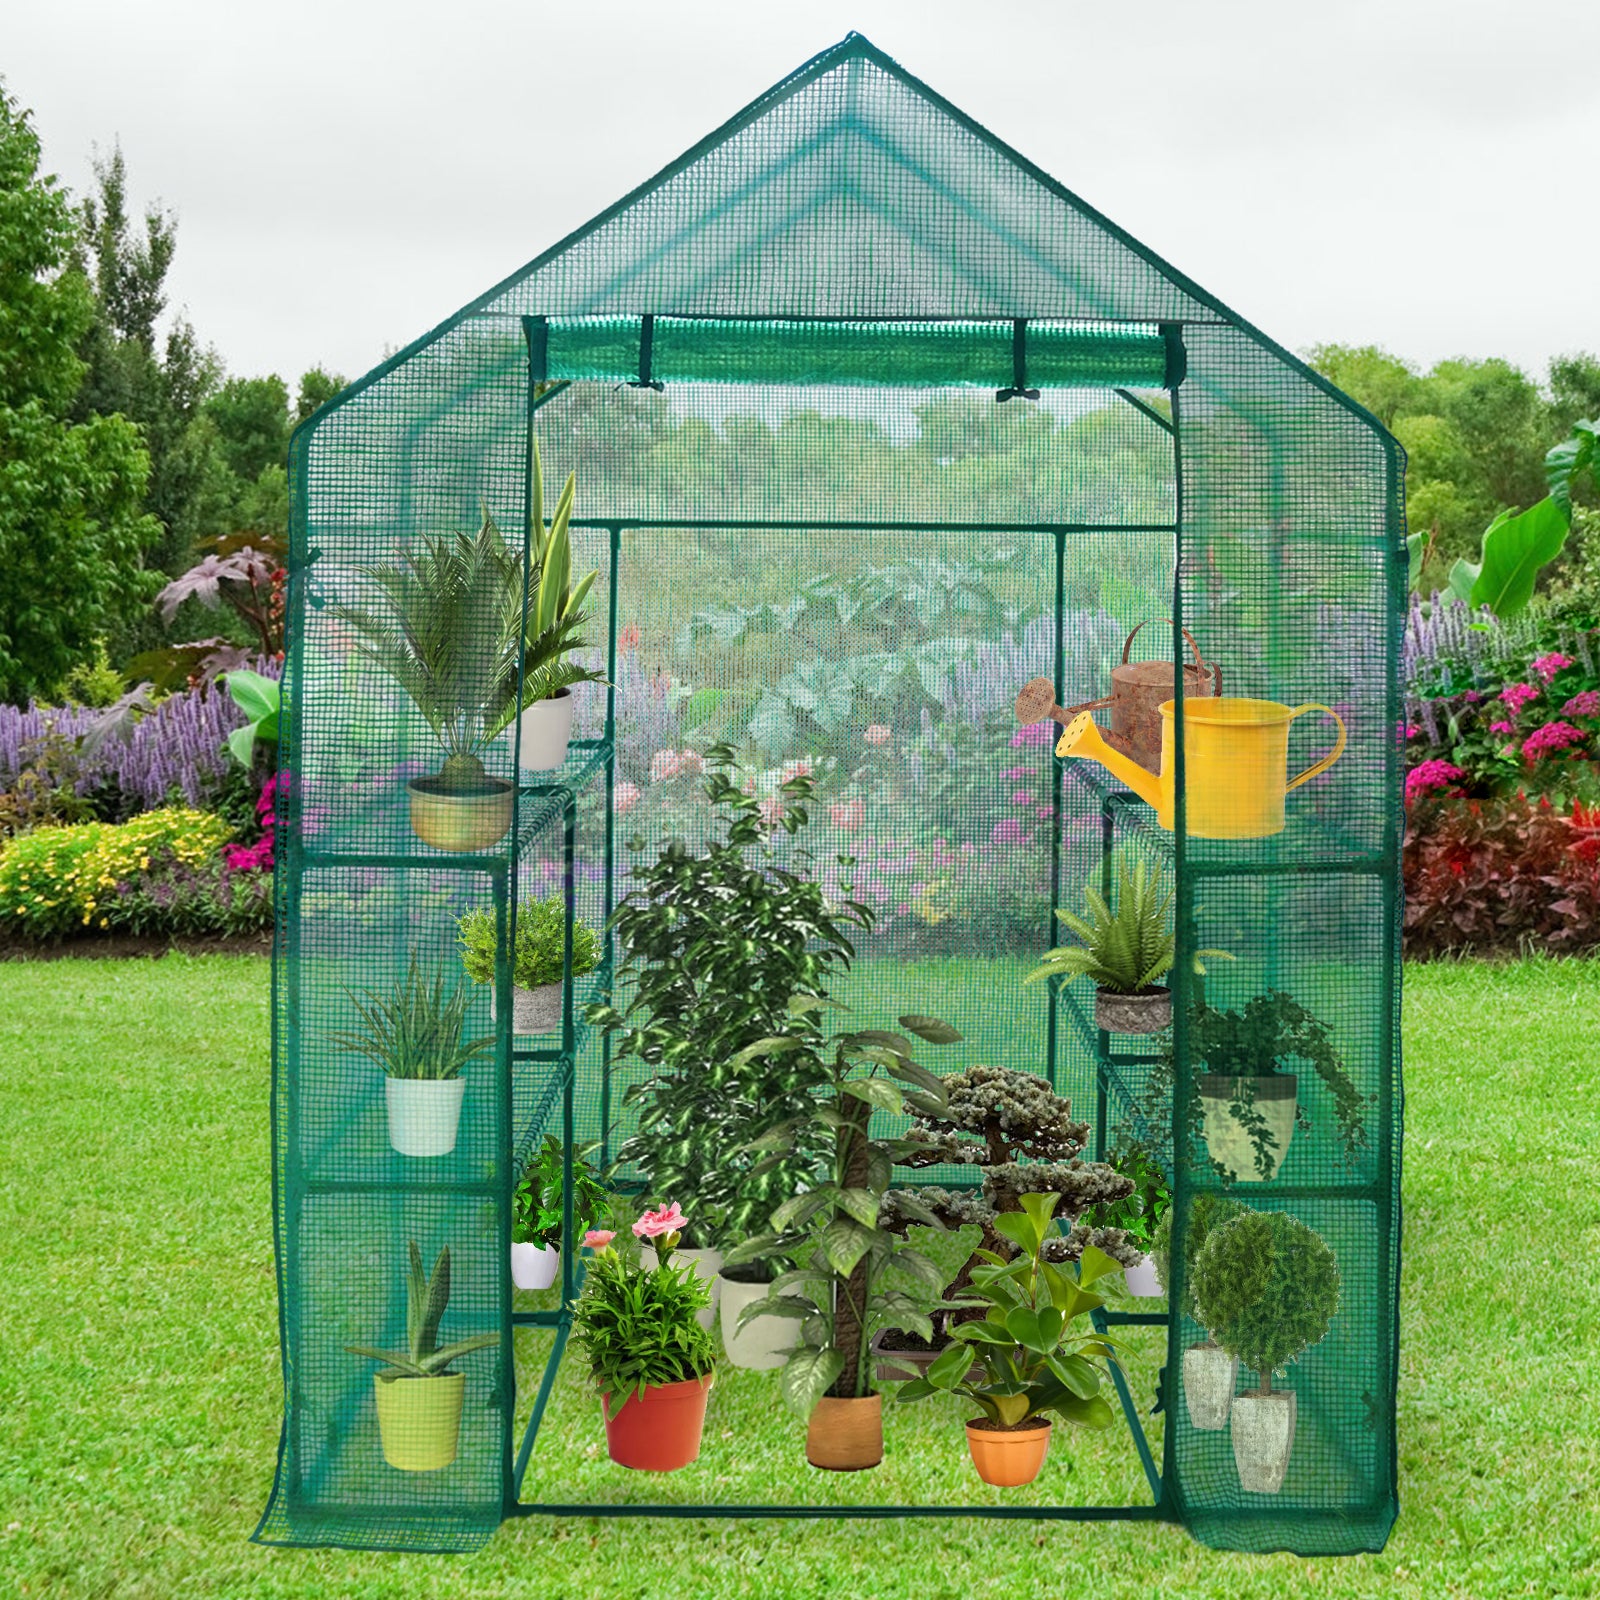 3 Tiers 8 Shelves Walk-in Greenhouse Mini Portable Outdoor Planter House